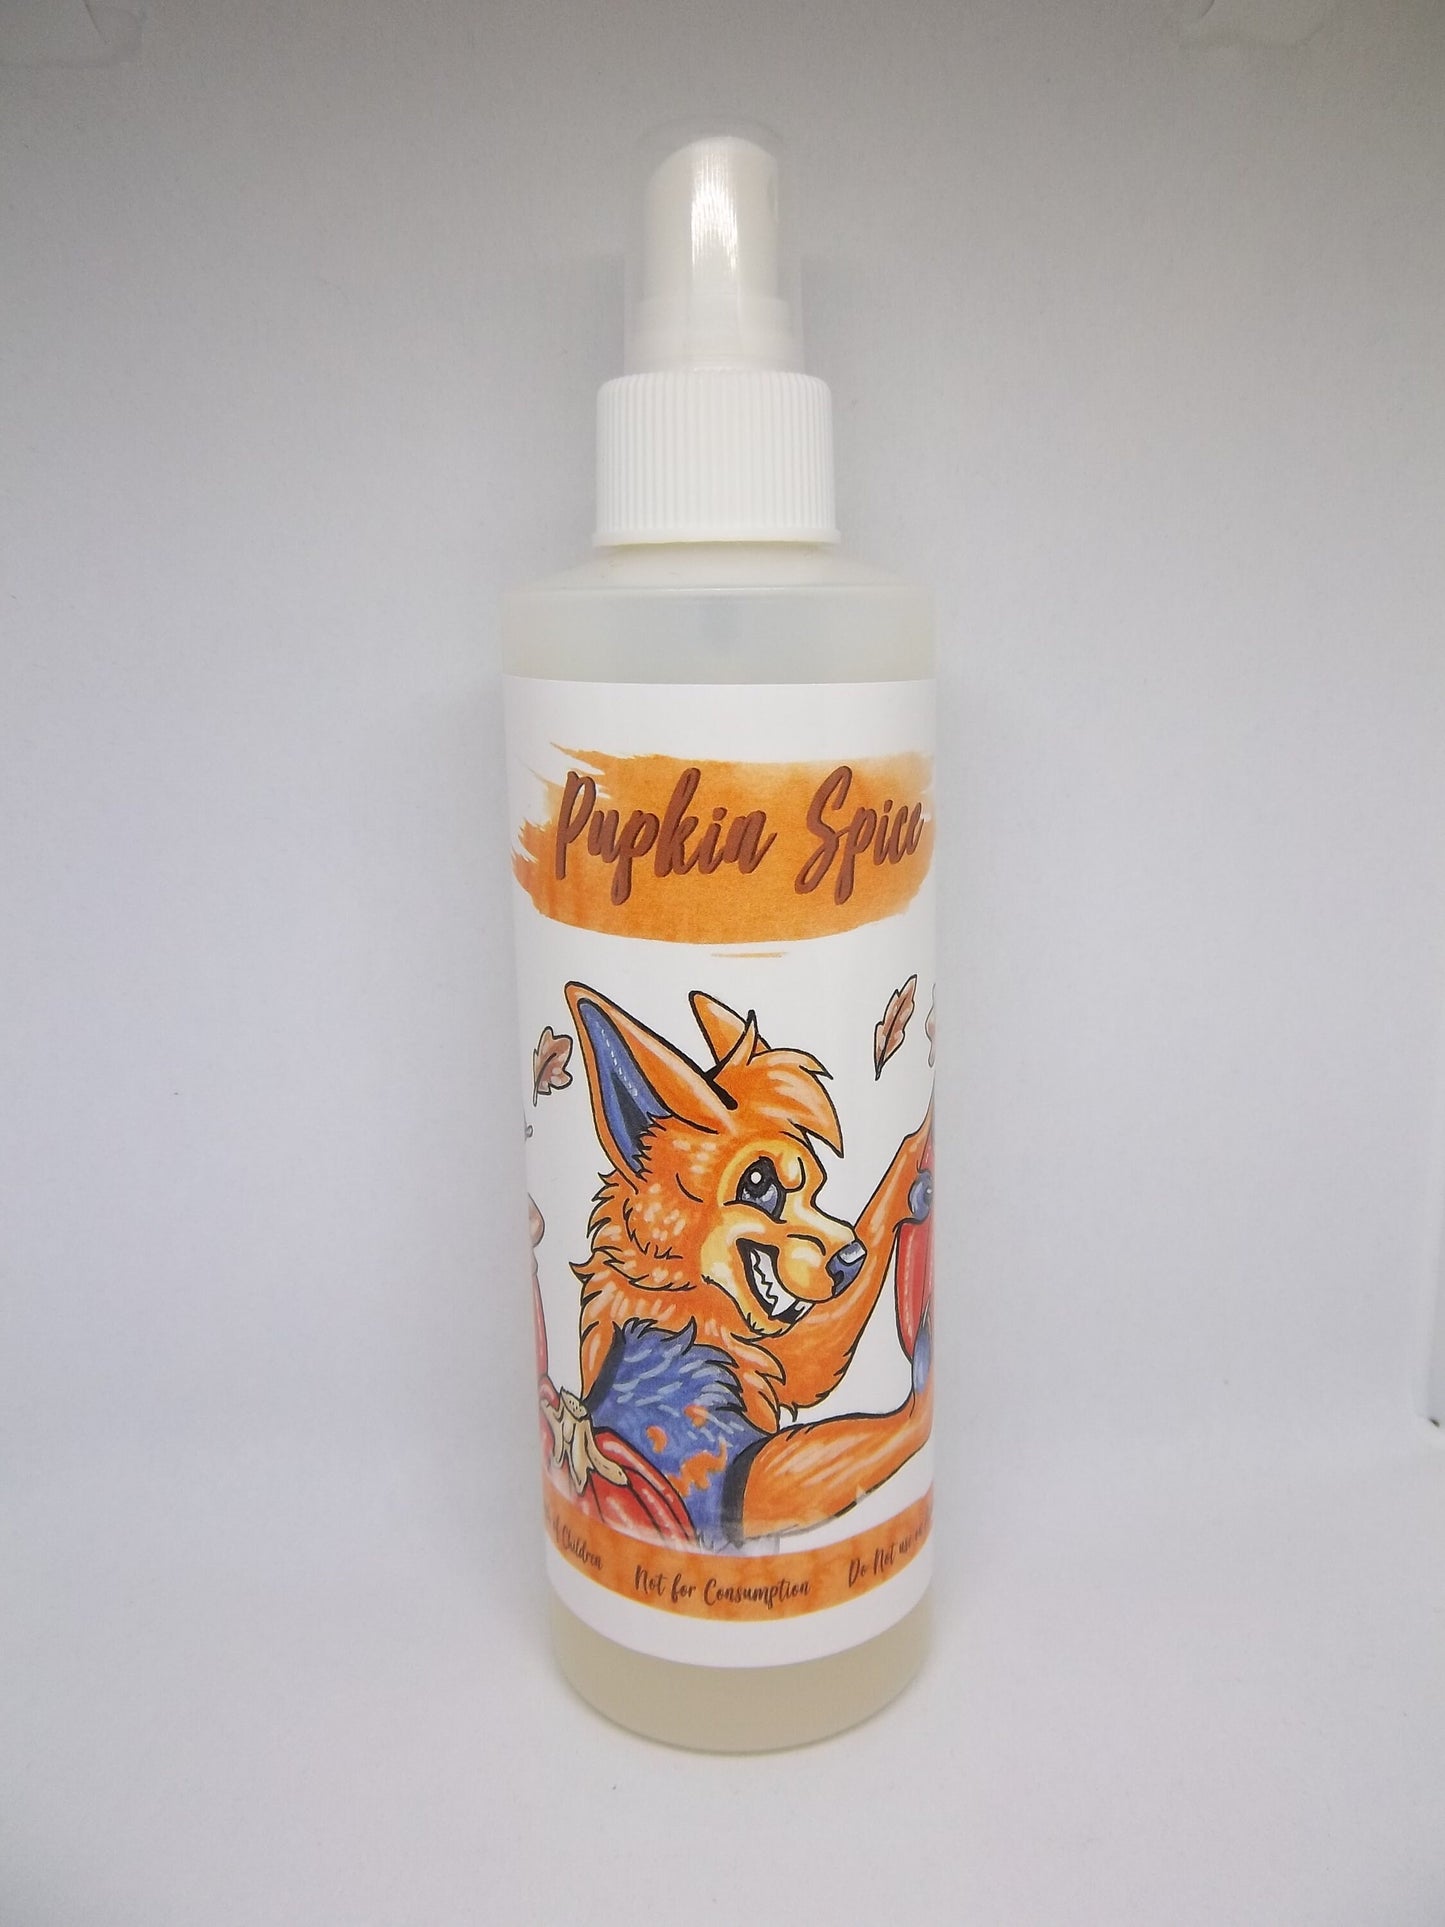 Fursuit Spray Pumpkin Spice Pupkin Spice Bottle Fragrance and Cleaner 8oz Essential Cleaning Costume Cleaner US Buyers Only